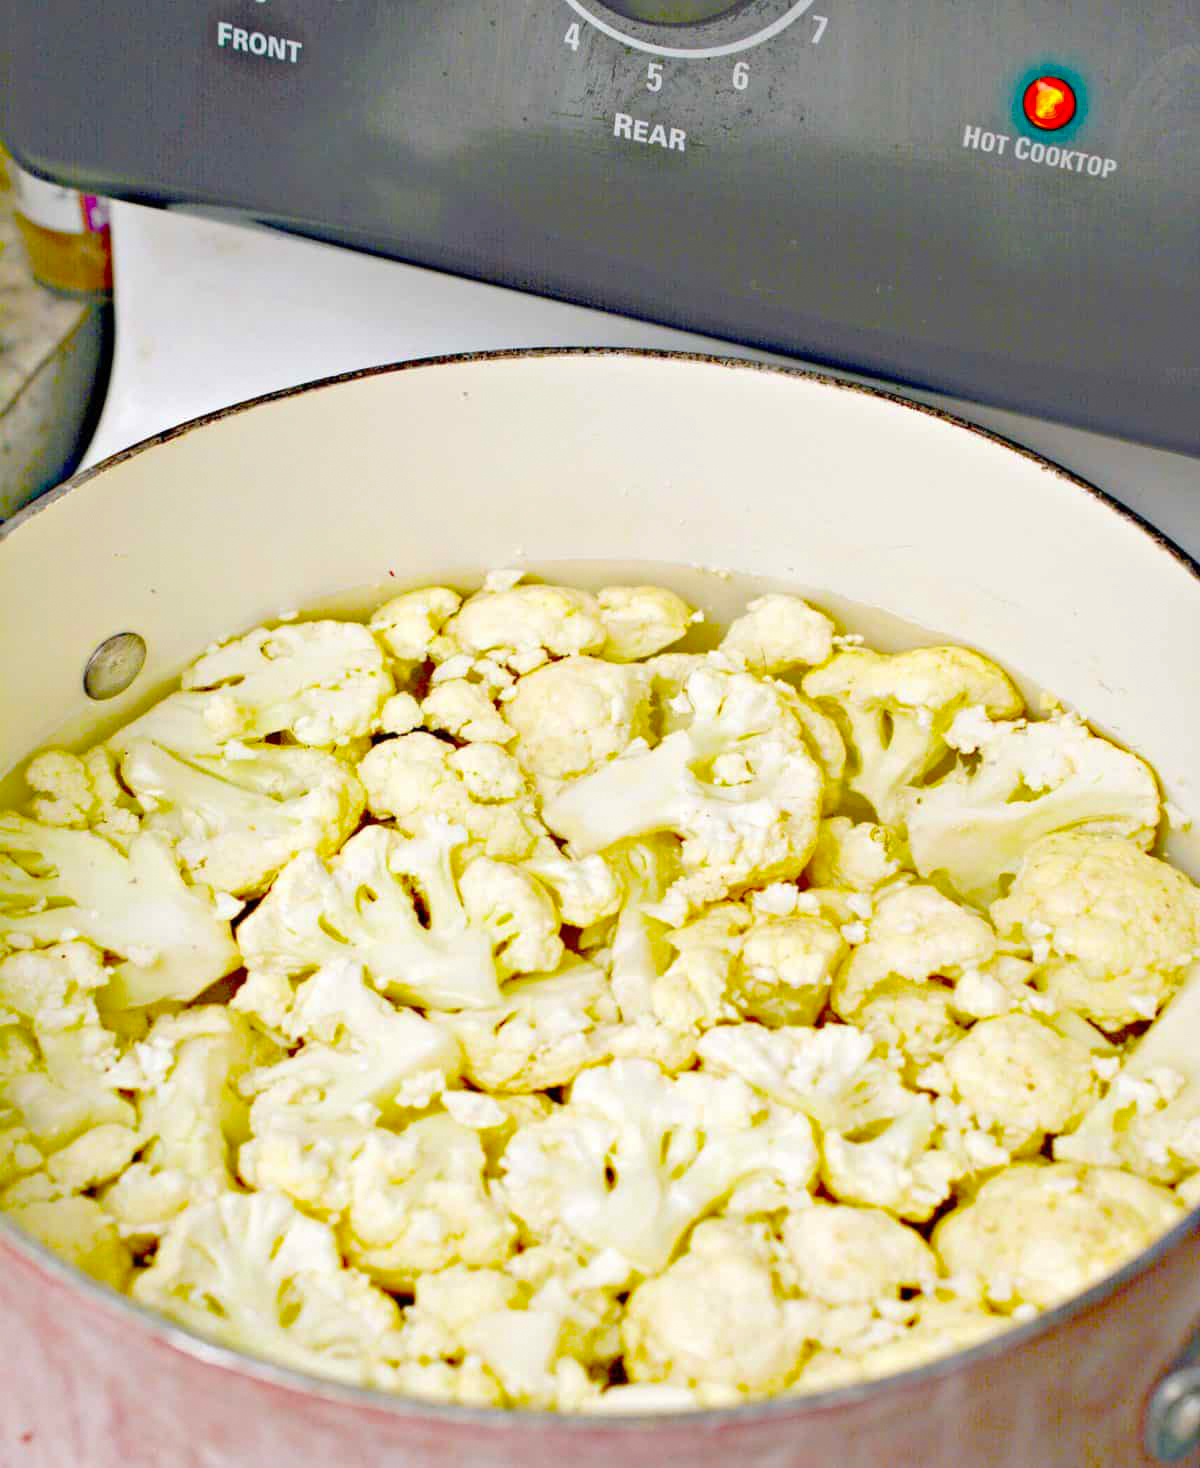 Bring the cauliflower in water to a boil over medium-high heat on the stove.